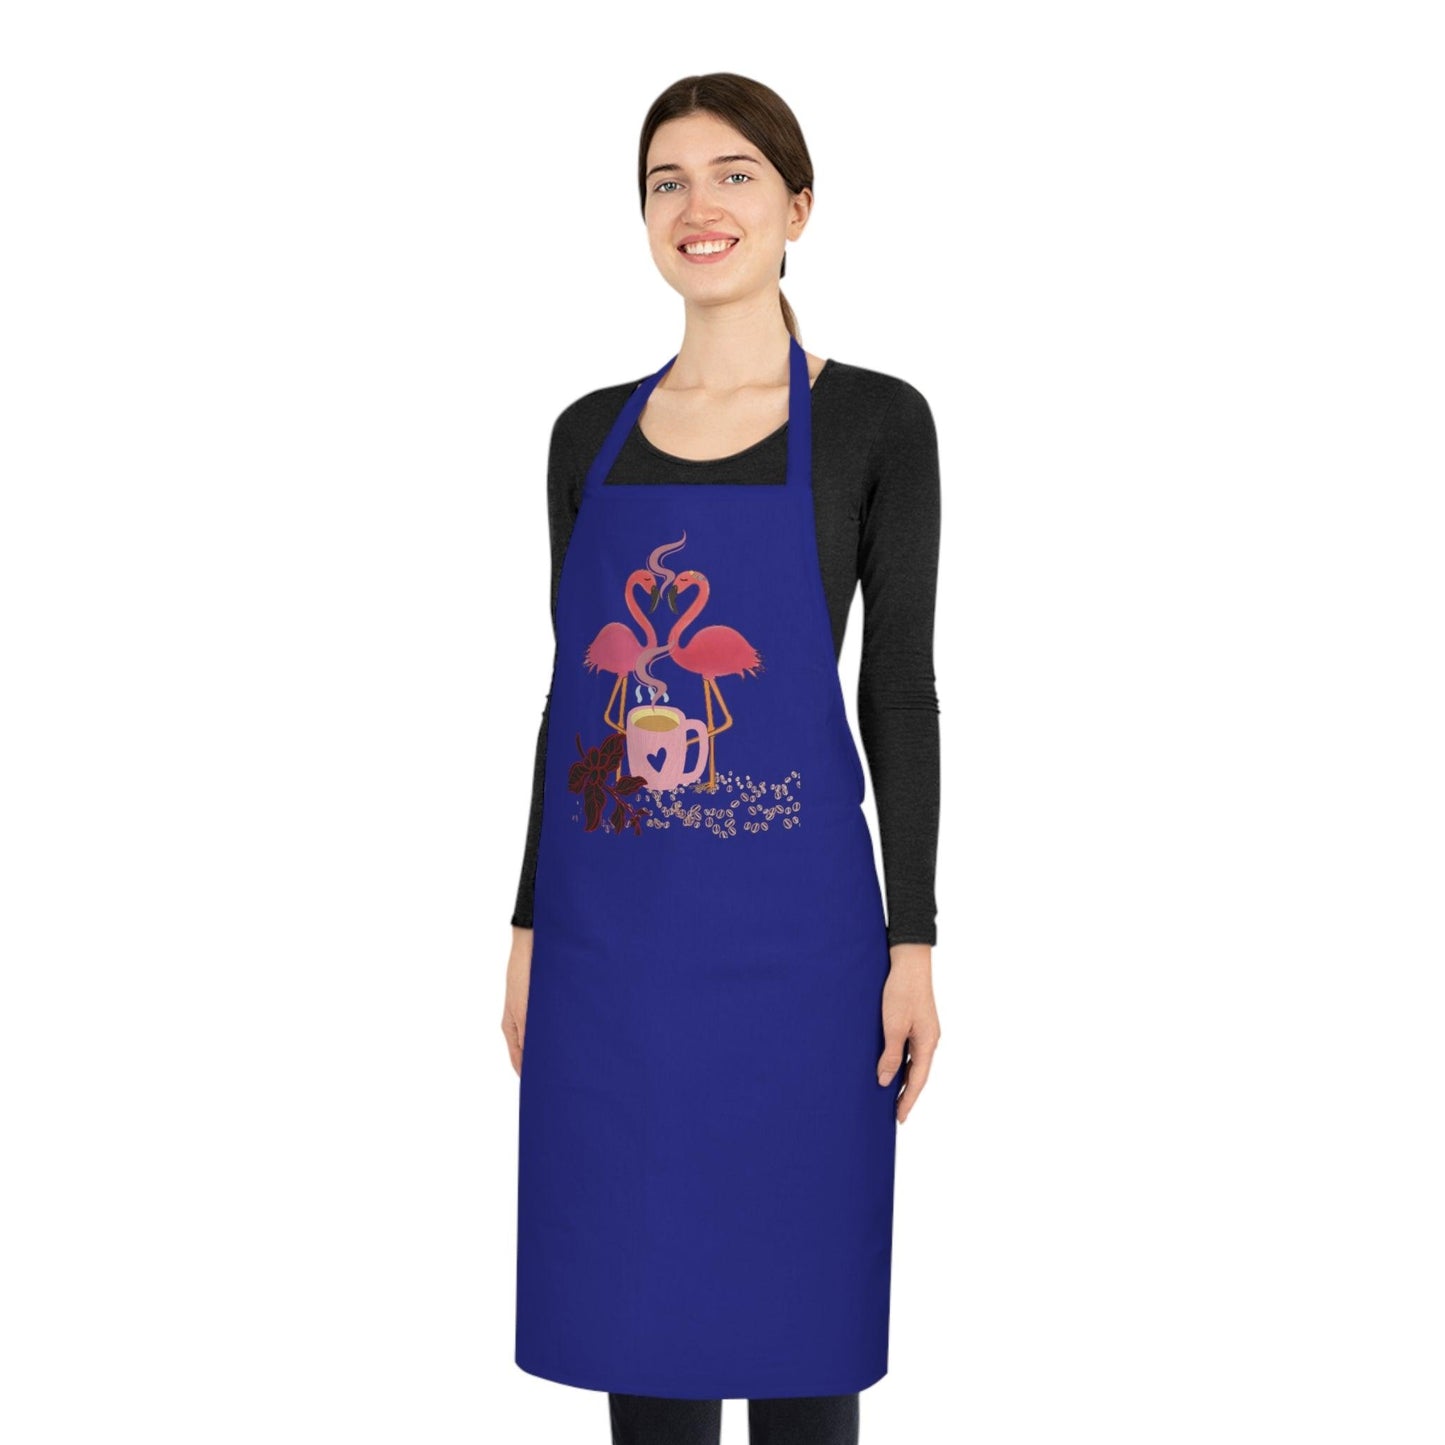 Cute Adult Cafe Cooking Apron - COFFEEBRE